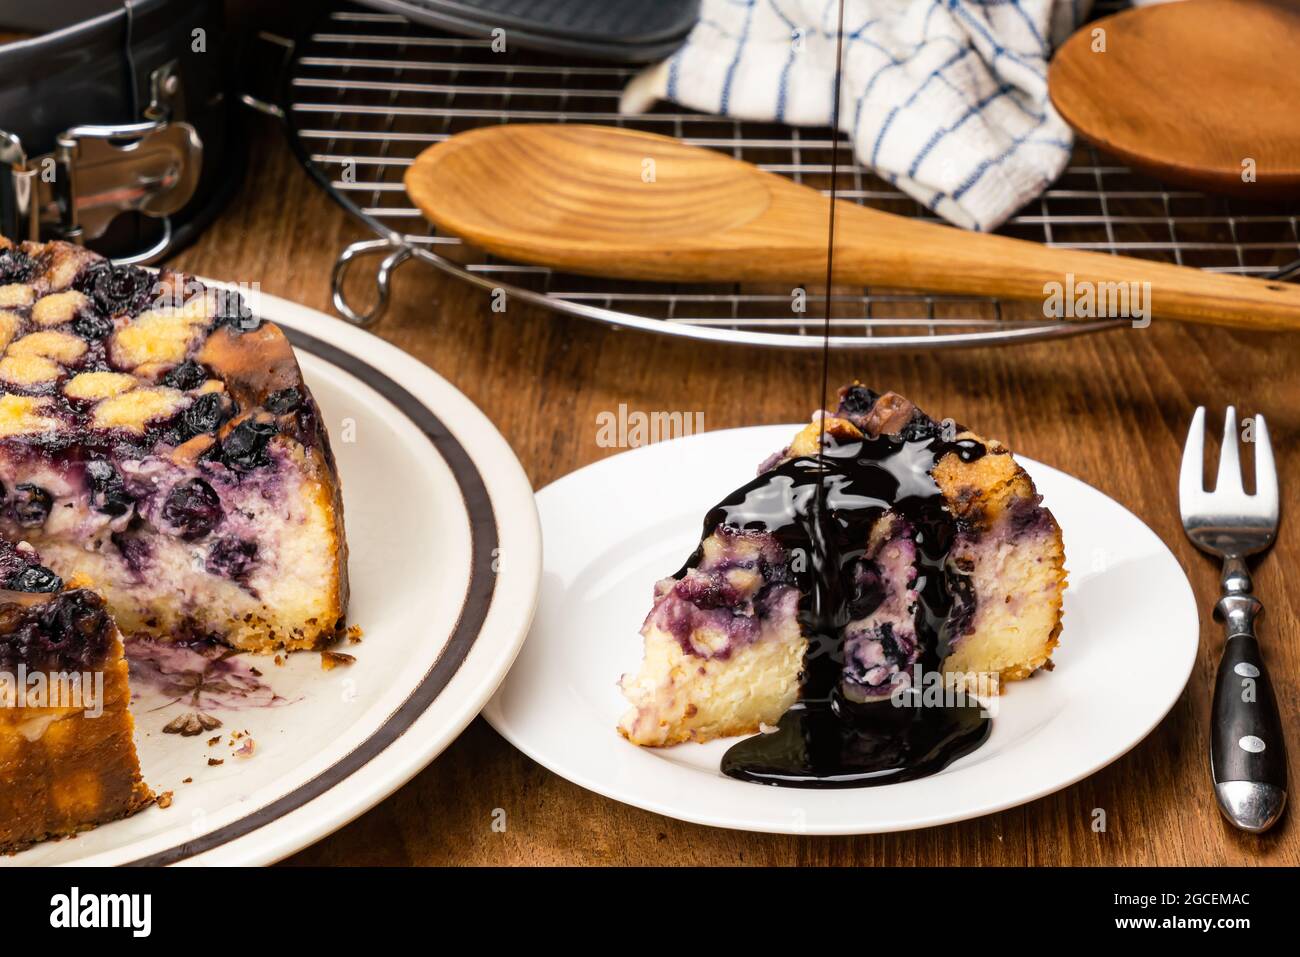 Pouring topping chocolate on a piece of delicious homemade blueberry and crumble cheesecake in white ceramic dish with a big one in brown dish, wooden Stock Photo